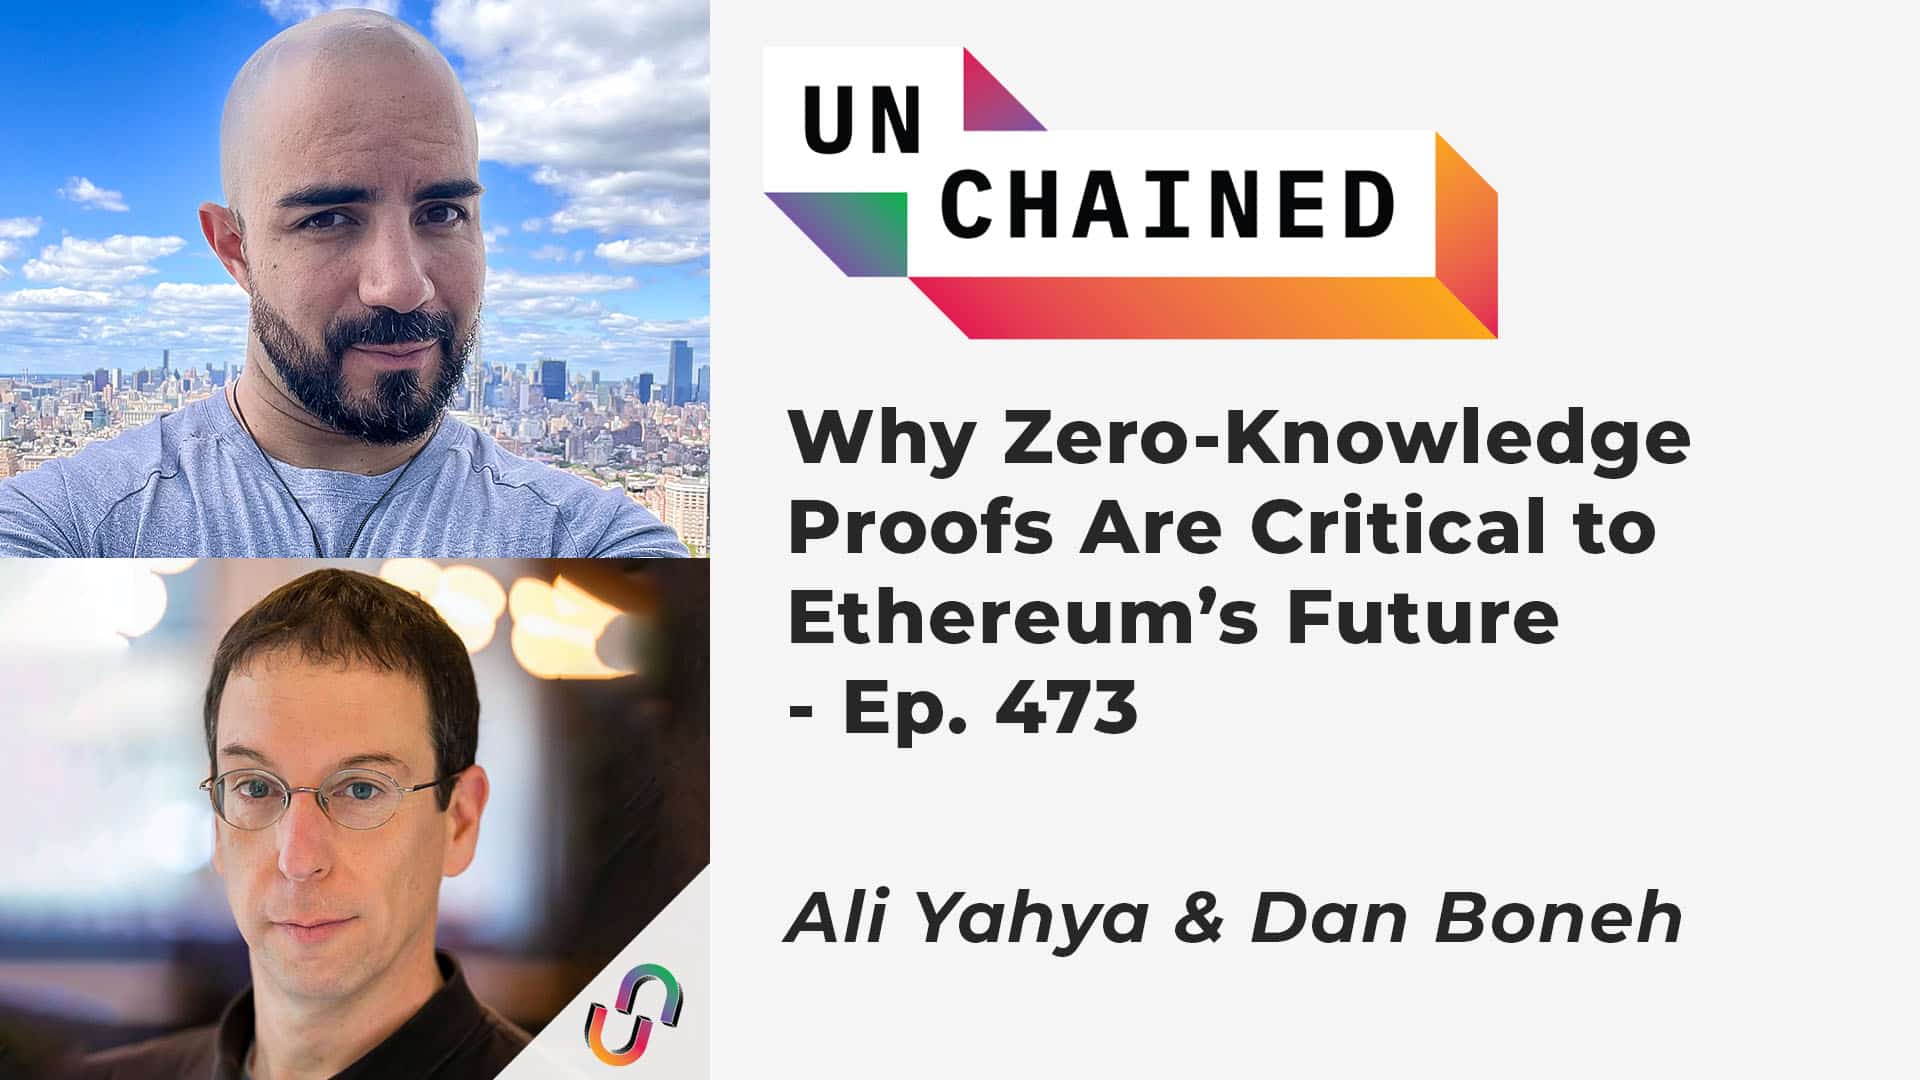 Why Zero-Knowledge Proofs Are Critical to Ethereum’s Future - Ep. 473